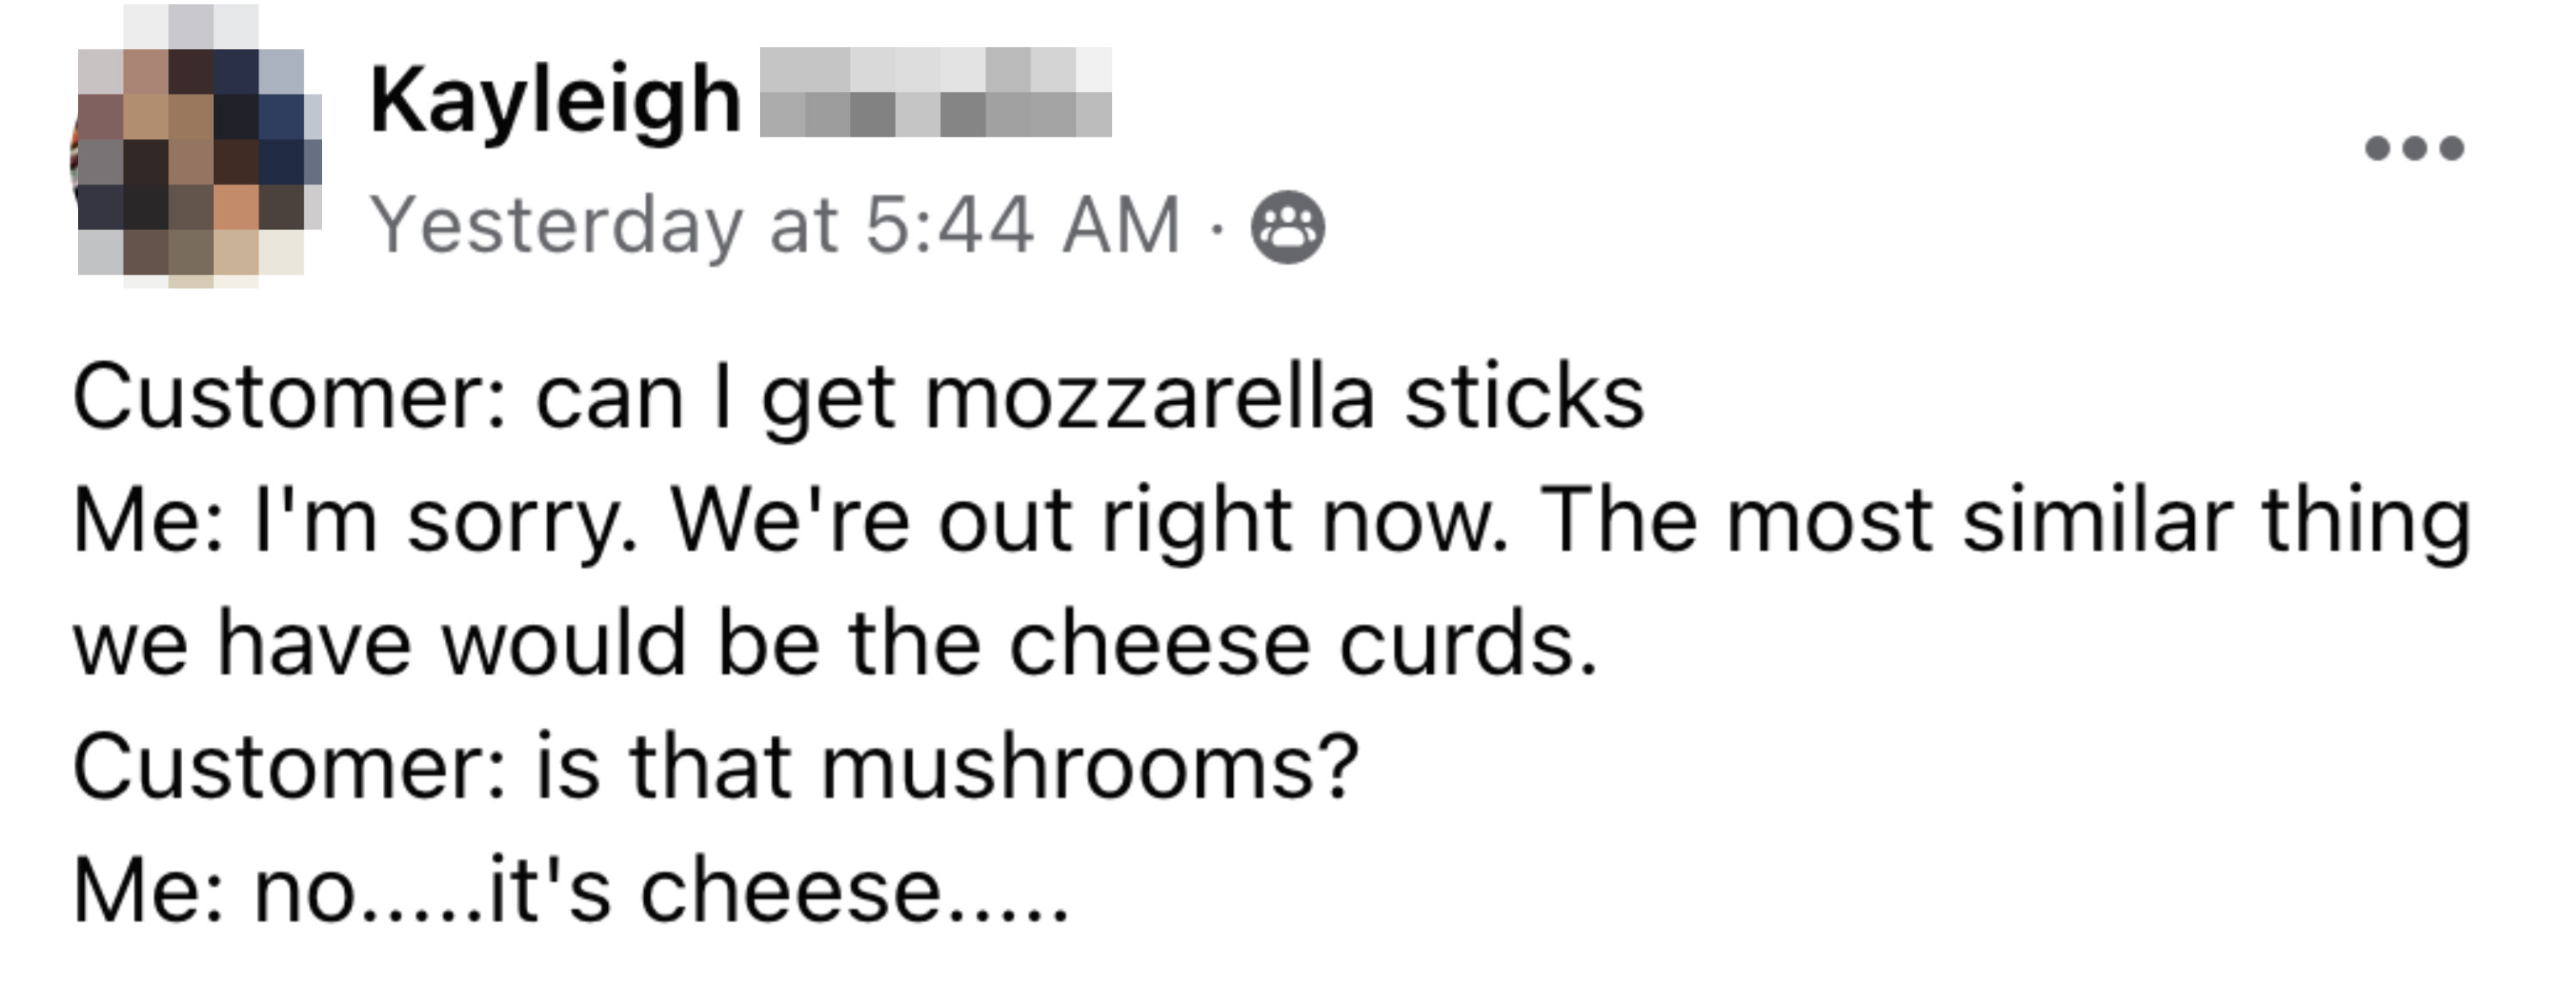 customer asks if cheese curds are mushrooms